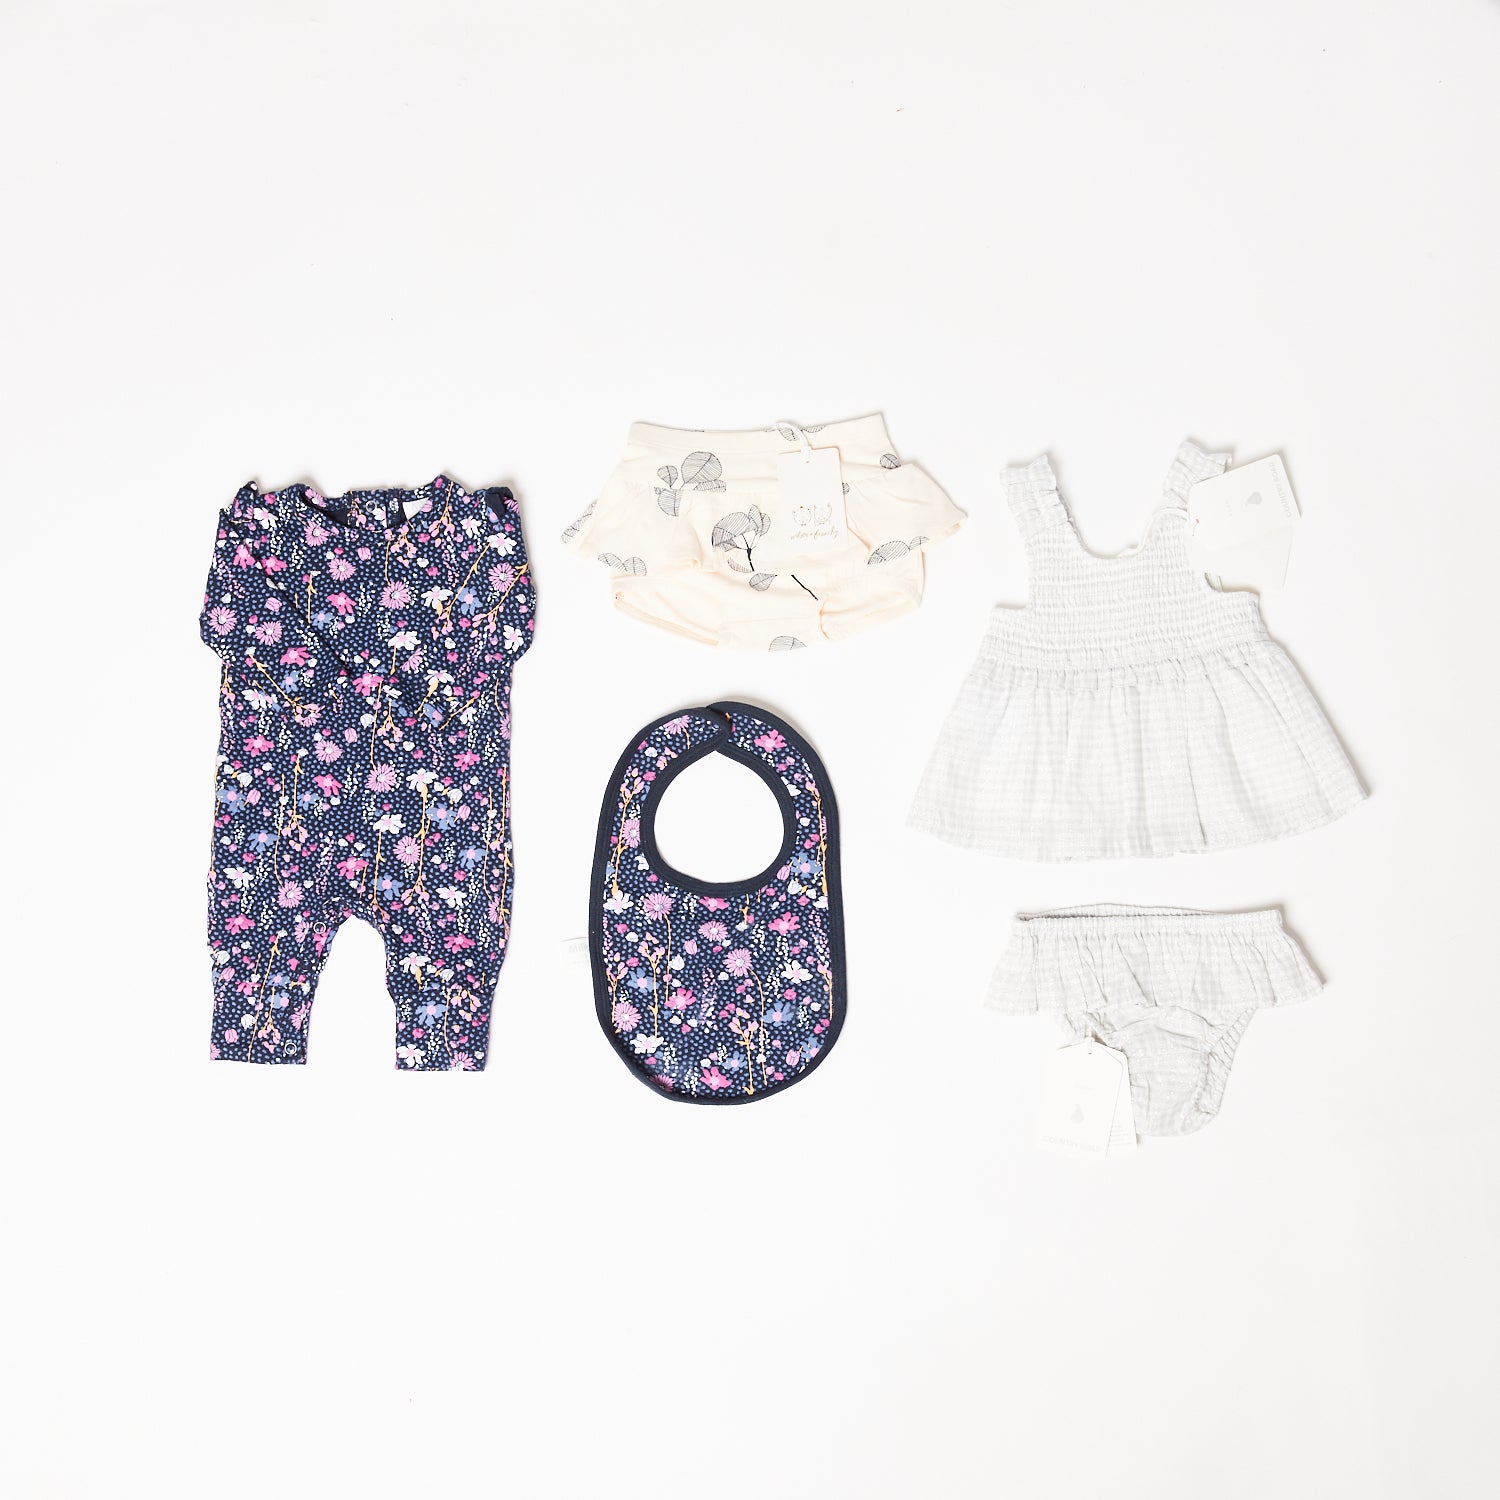 MIXED BRANDS (MILKY, COUNTRY ROAD, WILSON + FRENCHY) 5 PIECE BUNDLE, 0-3 MONTHS